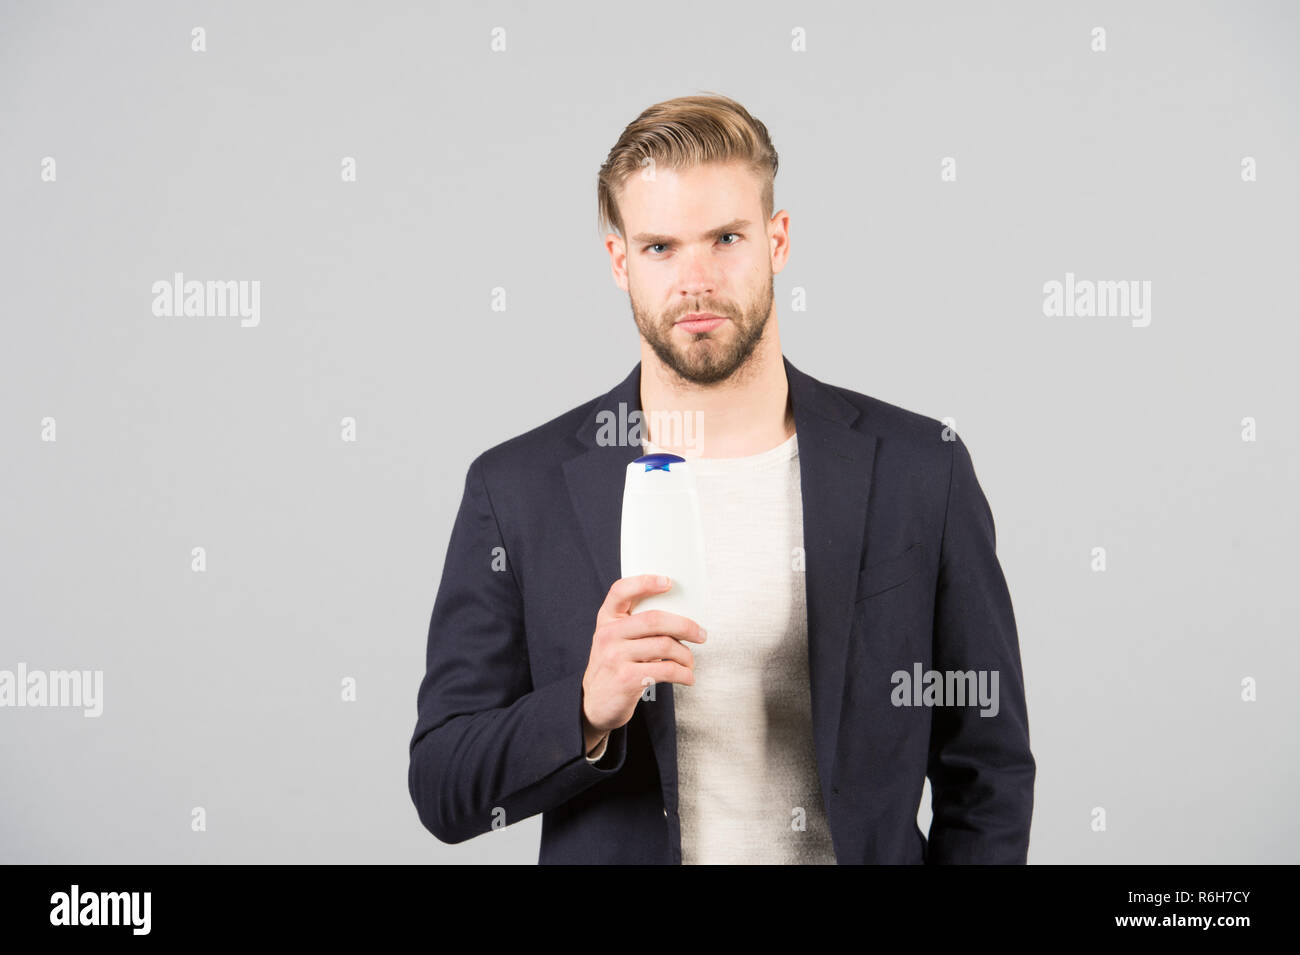 Dandruff common male problem. Remedies get rid of dandruff. Man formal suit hold bottle shampoo grey background. Itchy scalp and flakiness skin. Shampoo solve dandruff problem. Anti dandruff shampoo. Stock Photo